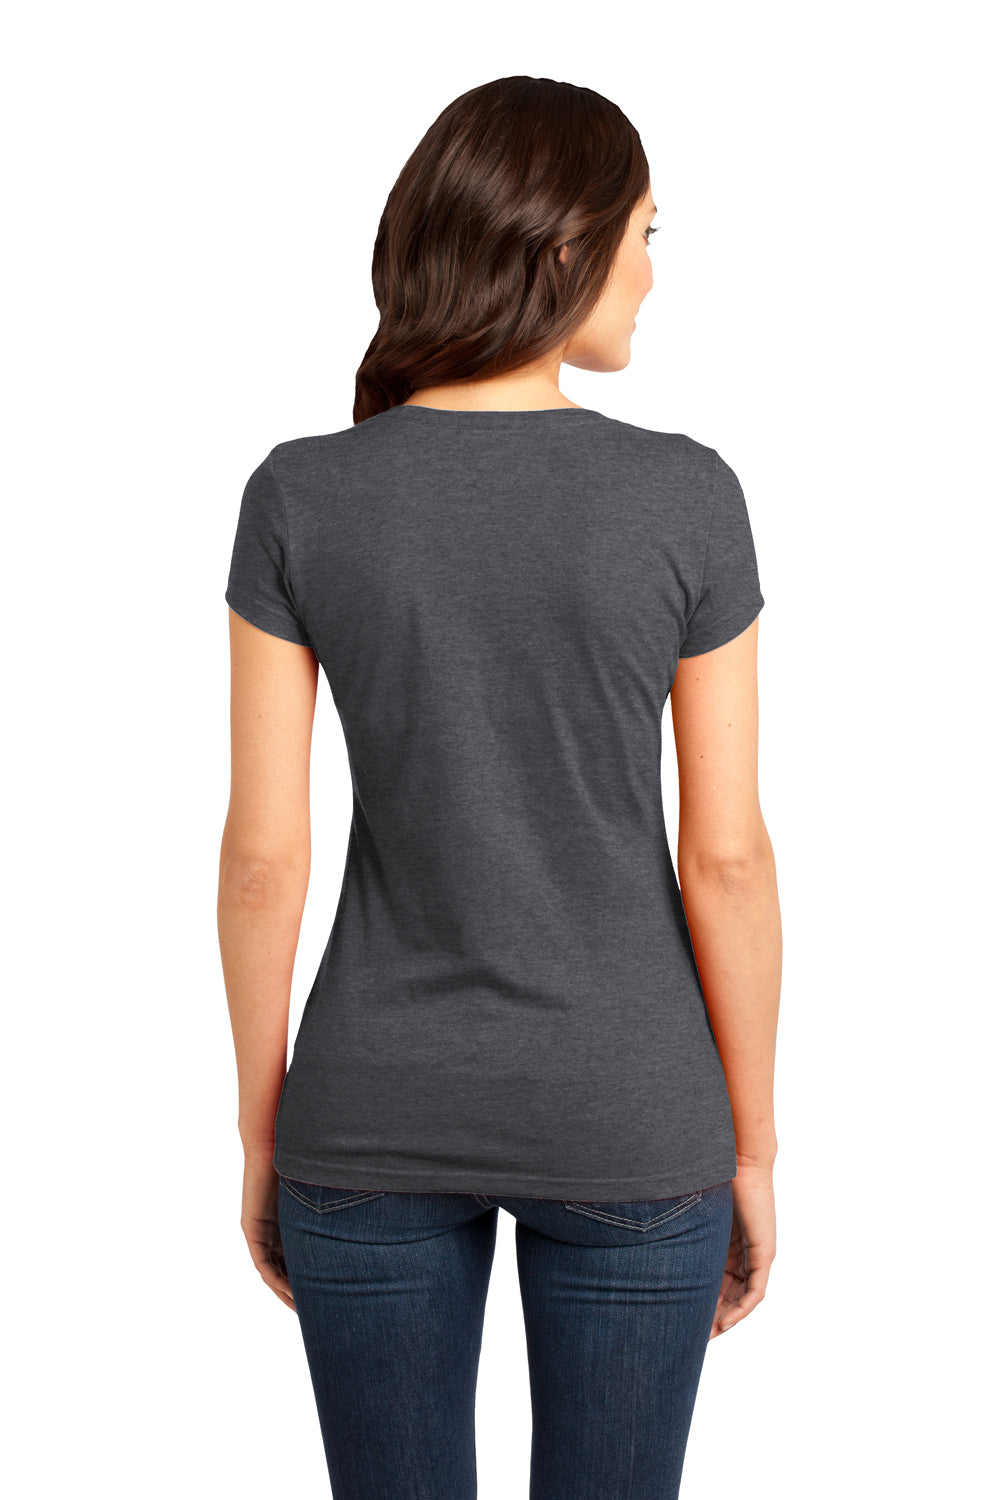 District DT6001 Womens Very Important Short Sleeve Crewneck T-Shirt Heather Charcoal Grey Back